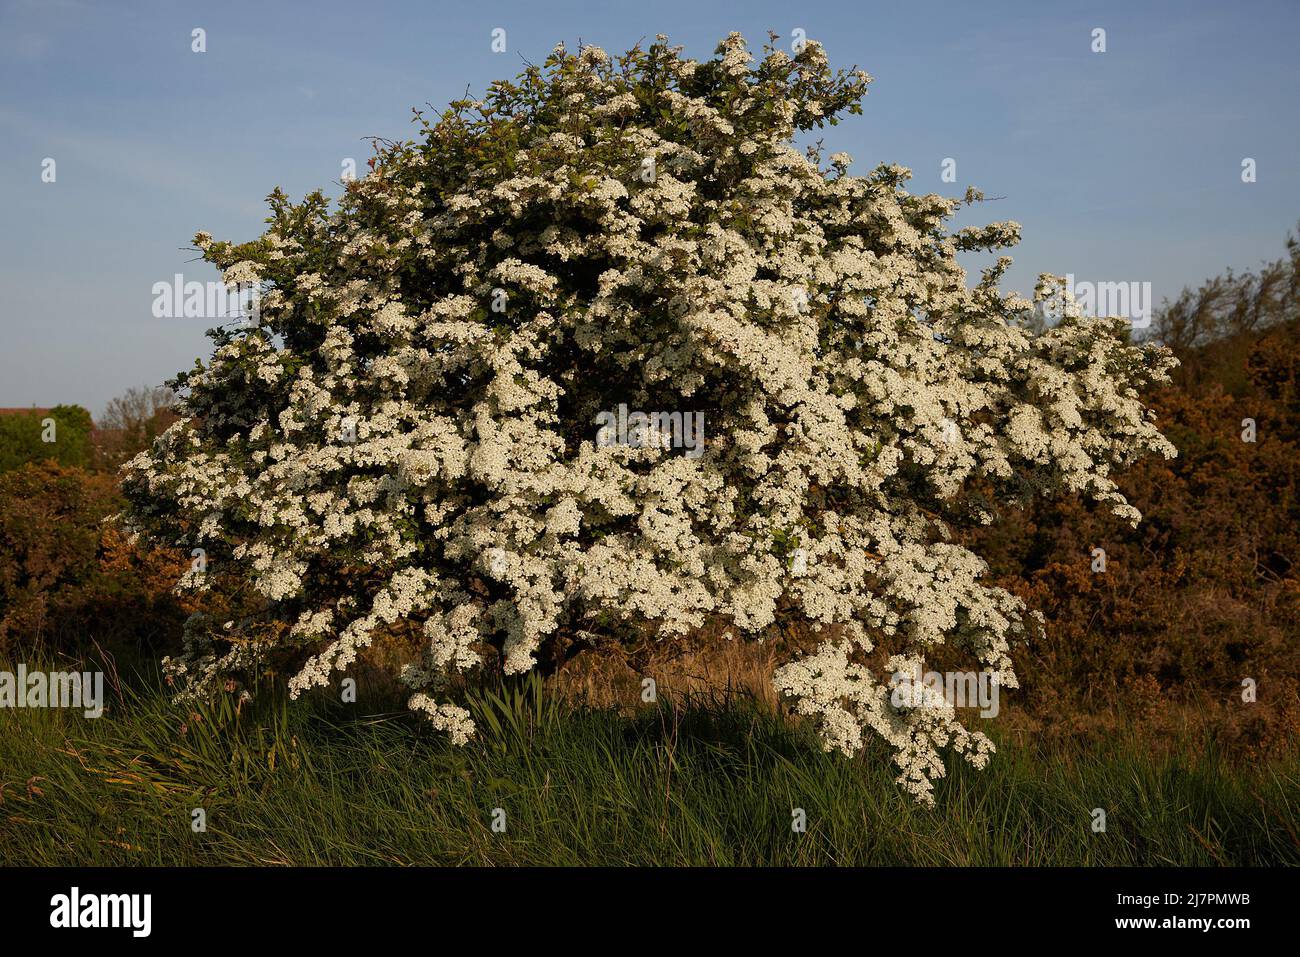 Close up of a Crataegus tree seen in flower outdoors in May in the UK. Stock Photo